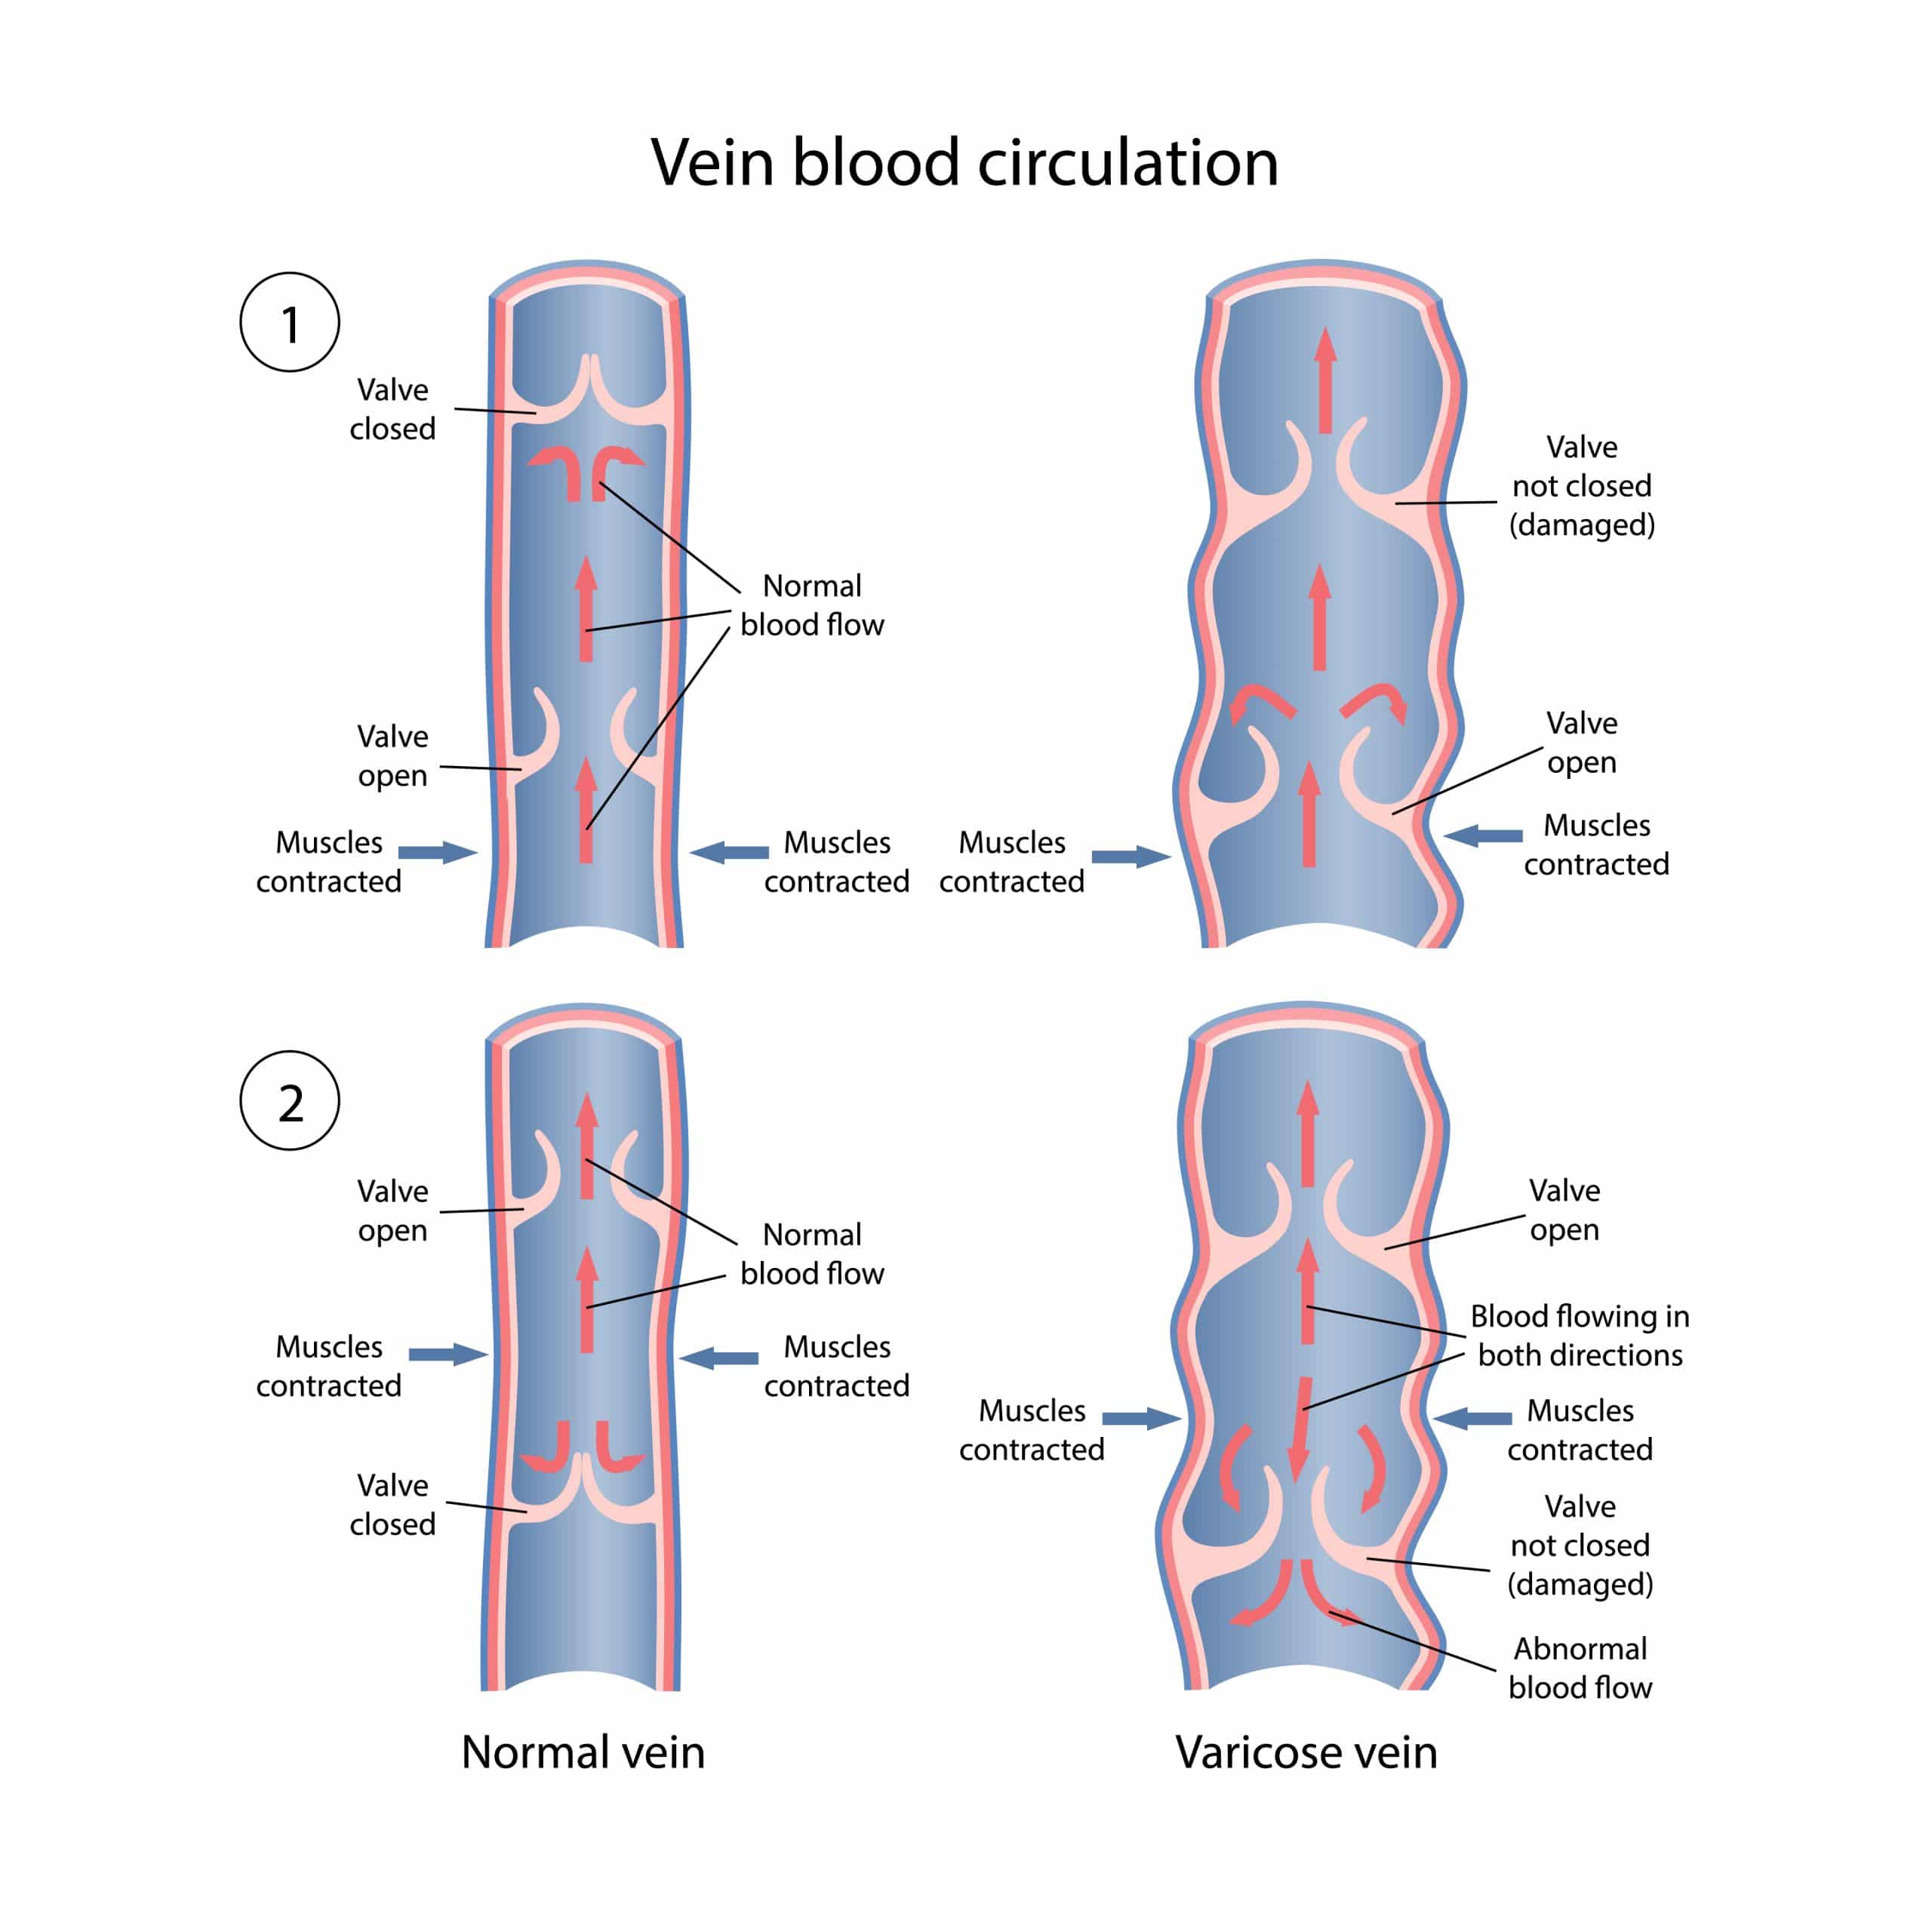 Vein blood circulation and the impact of Cold Weather on Circulation and Varicose Veins